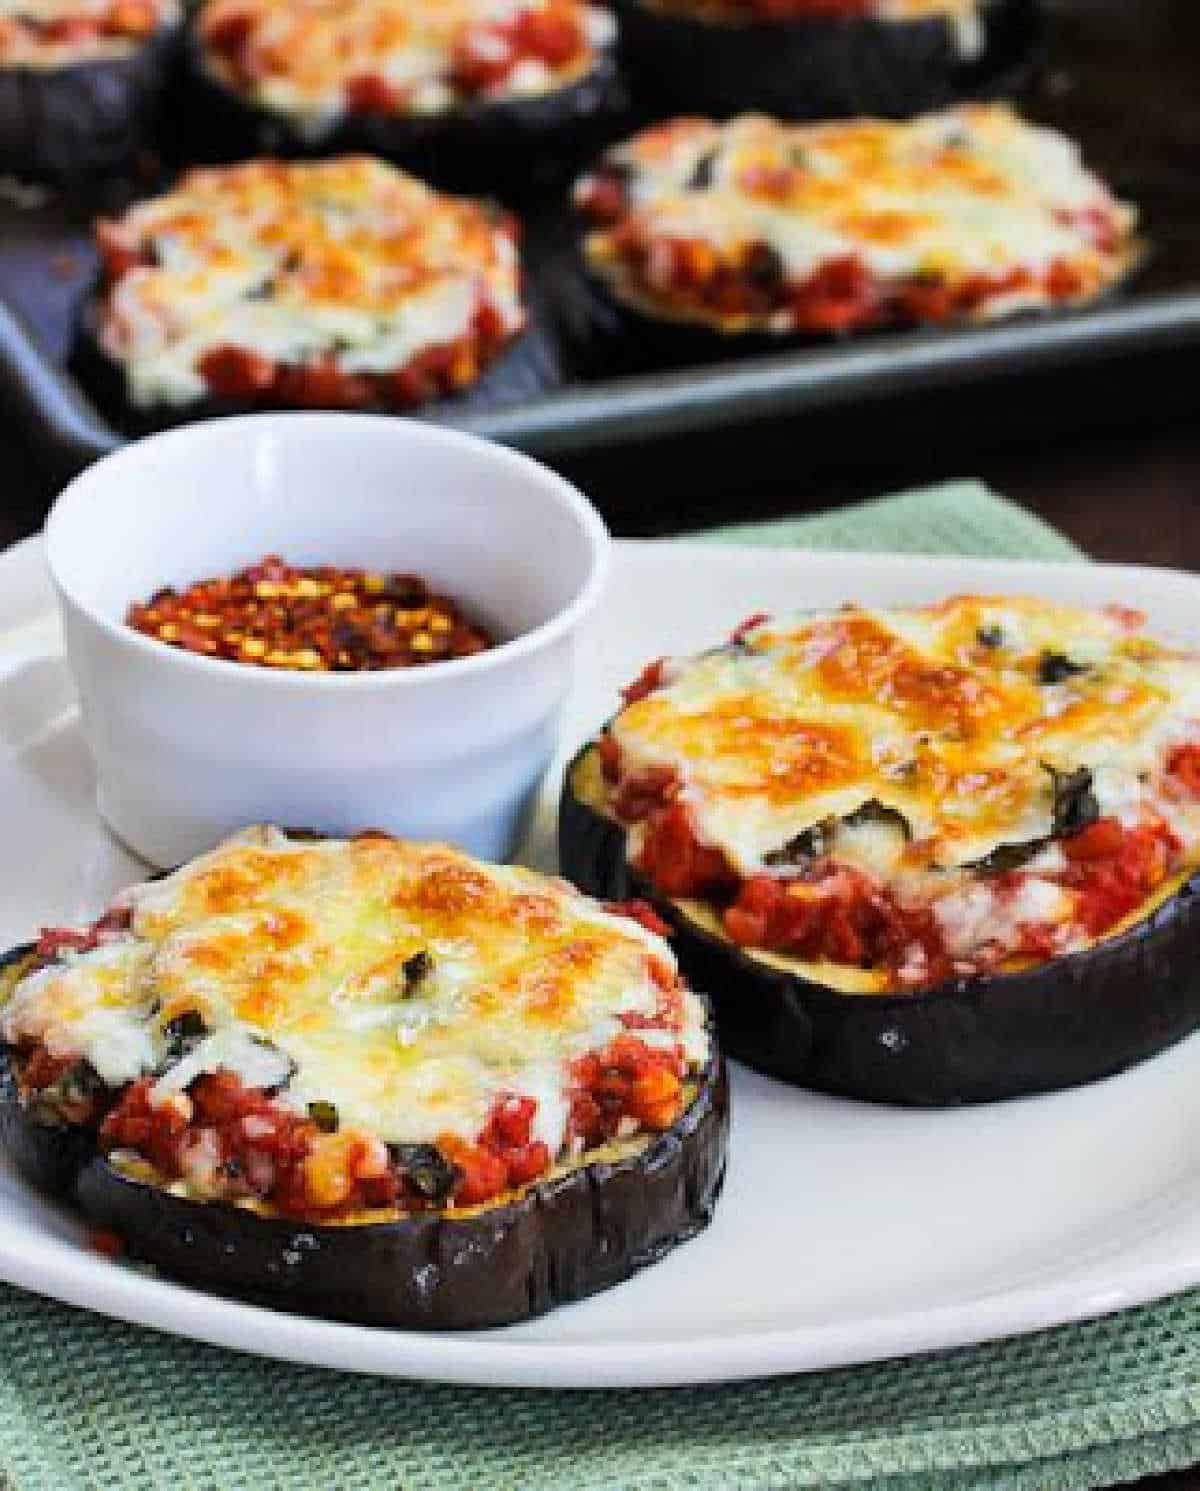 Julia Child's Eggplant Pizza cropped photo with eggplant pizza on serving plate with red pepper flakes